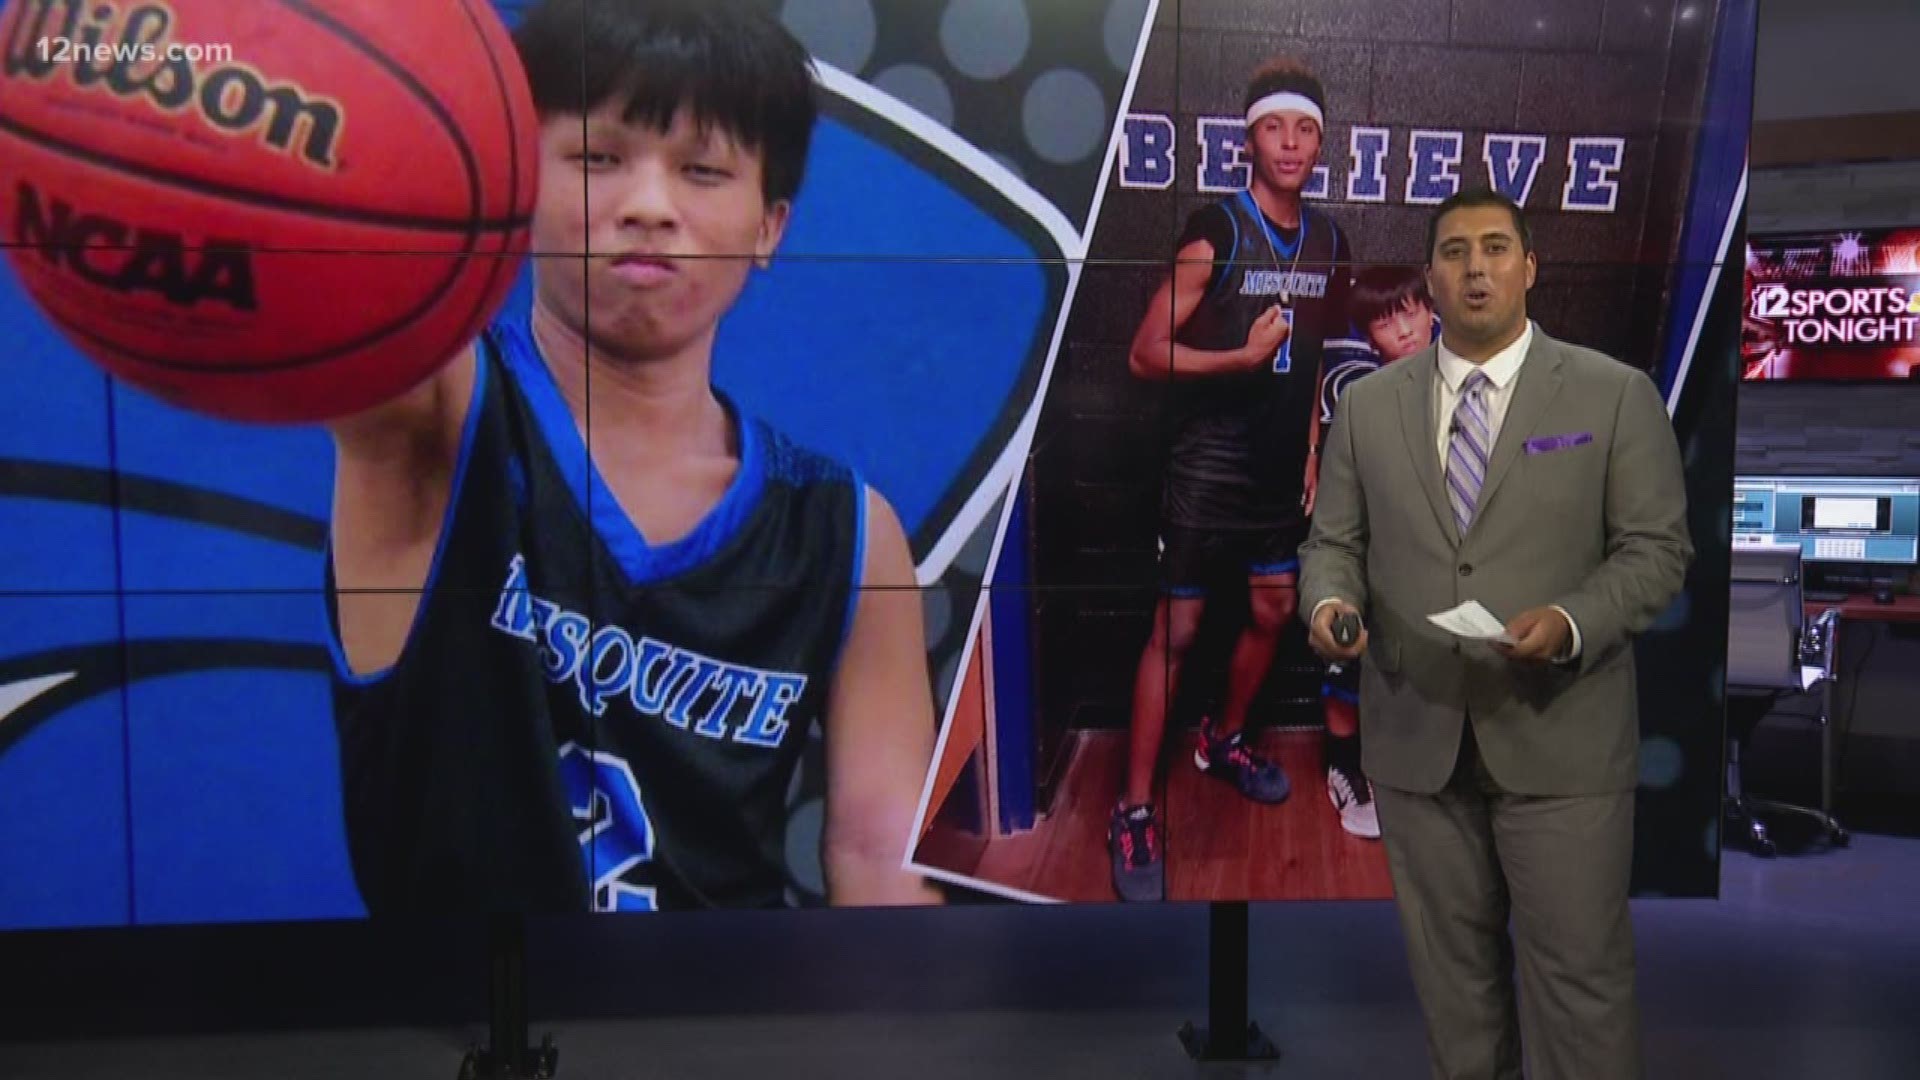 Mesquite High School student Brandon Kwan is using sports to break barriers and make an impact in the community.